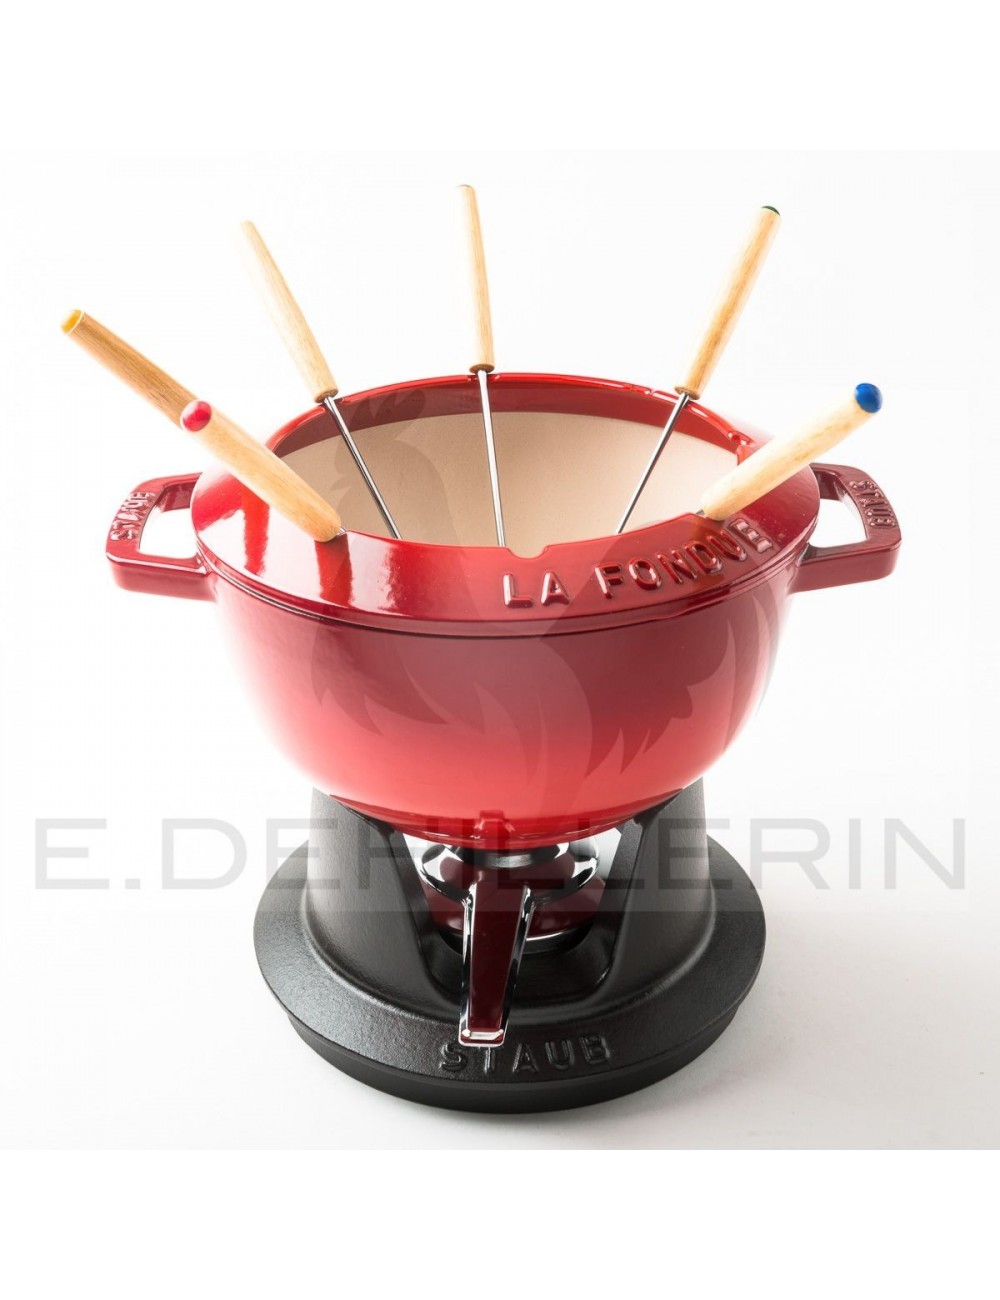 How to Use a Burner in a Fondue Set